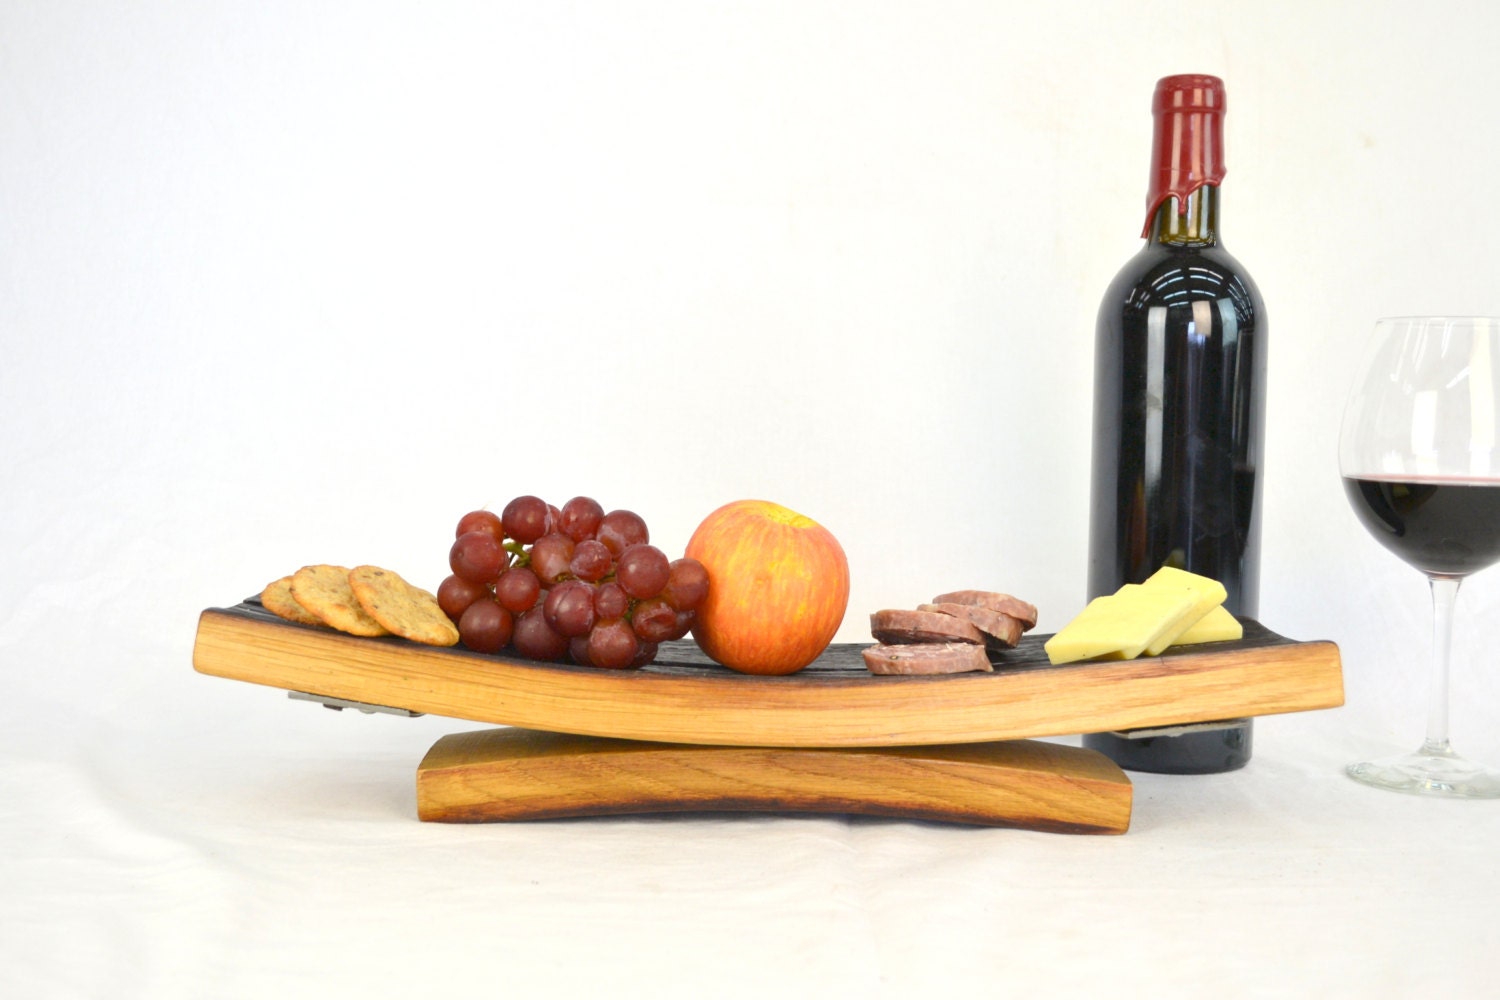 Wine Barrel Serving Tray - Kuveza - Made from retired California wine barrels 100% Recycled and ready to Ship!